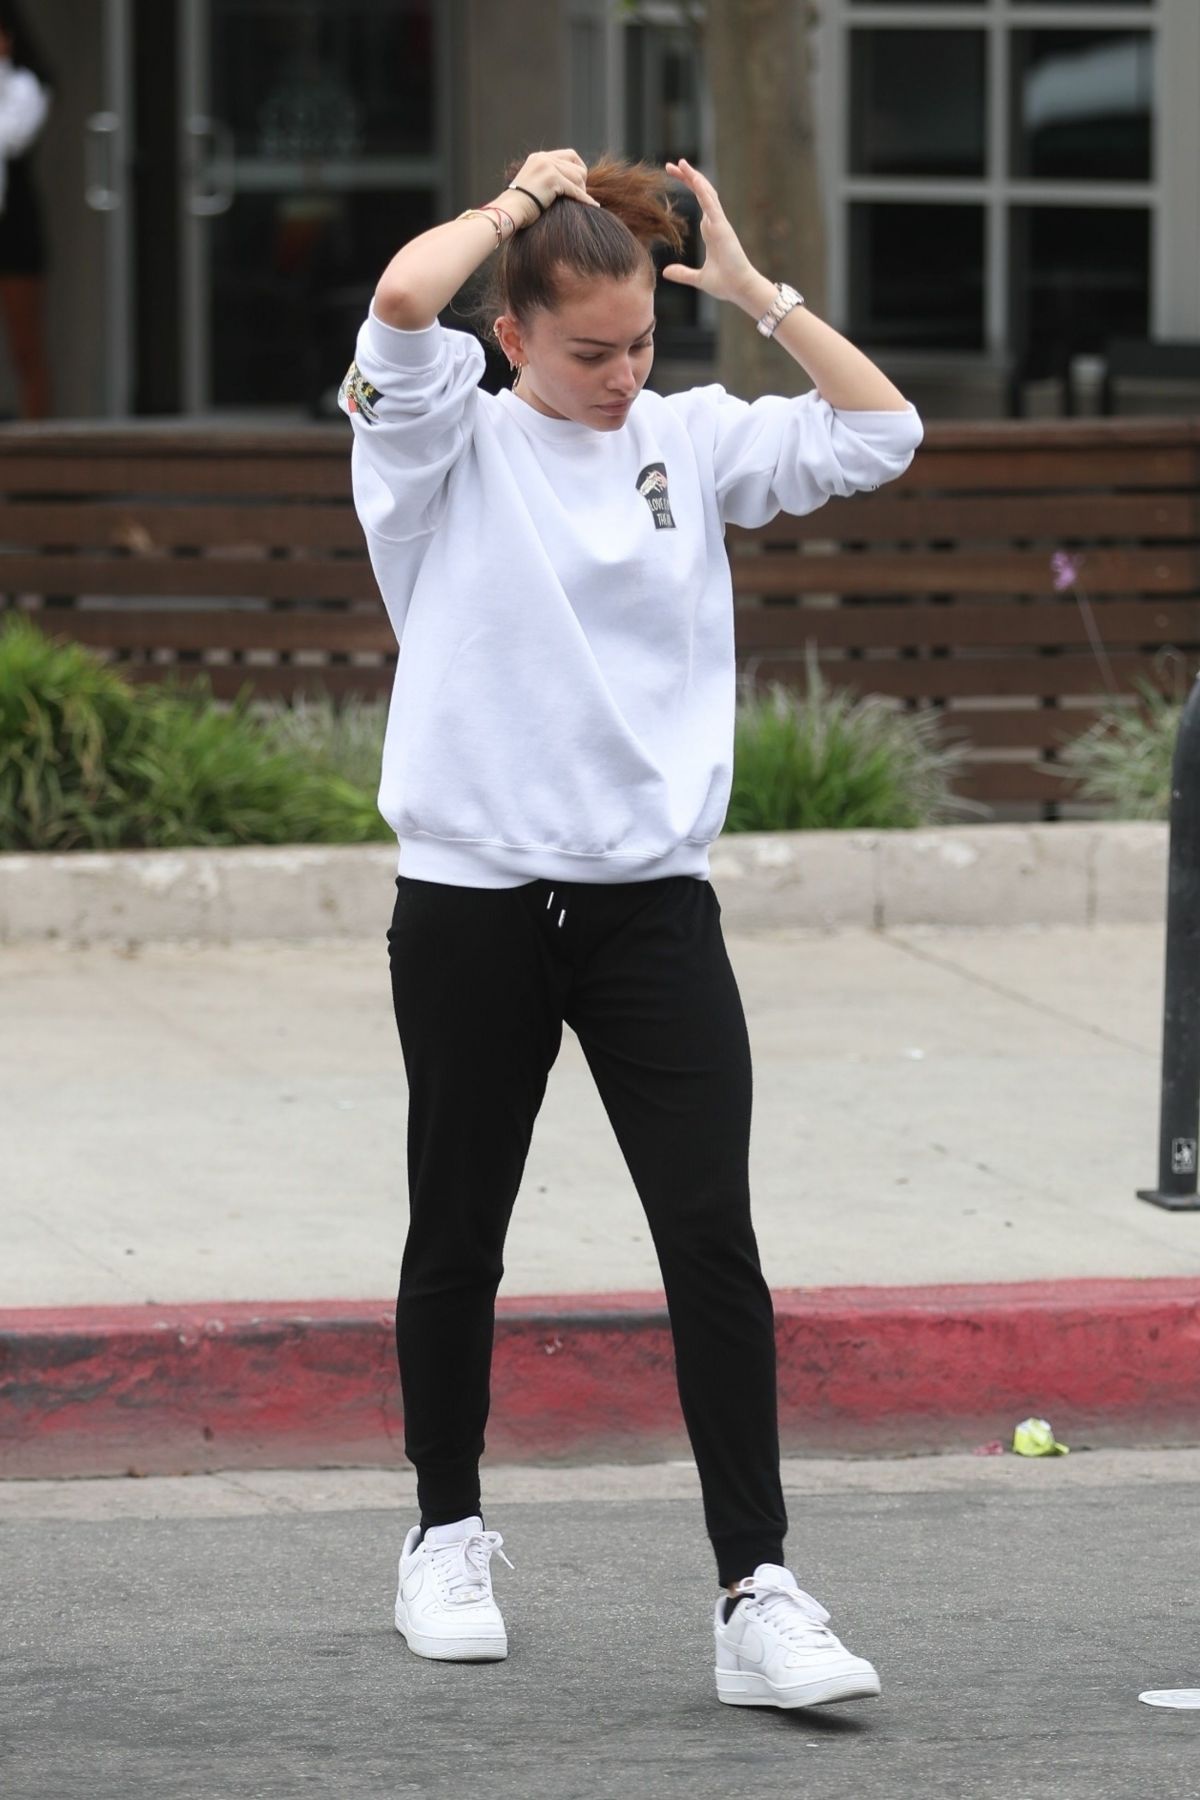 thylane-blondeau-and-samuel-bensoussan-riding-bird-scooters-in-west-hollywood-04-27-2019-2.jpg